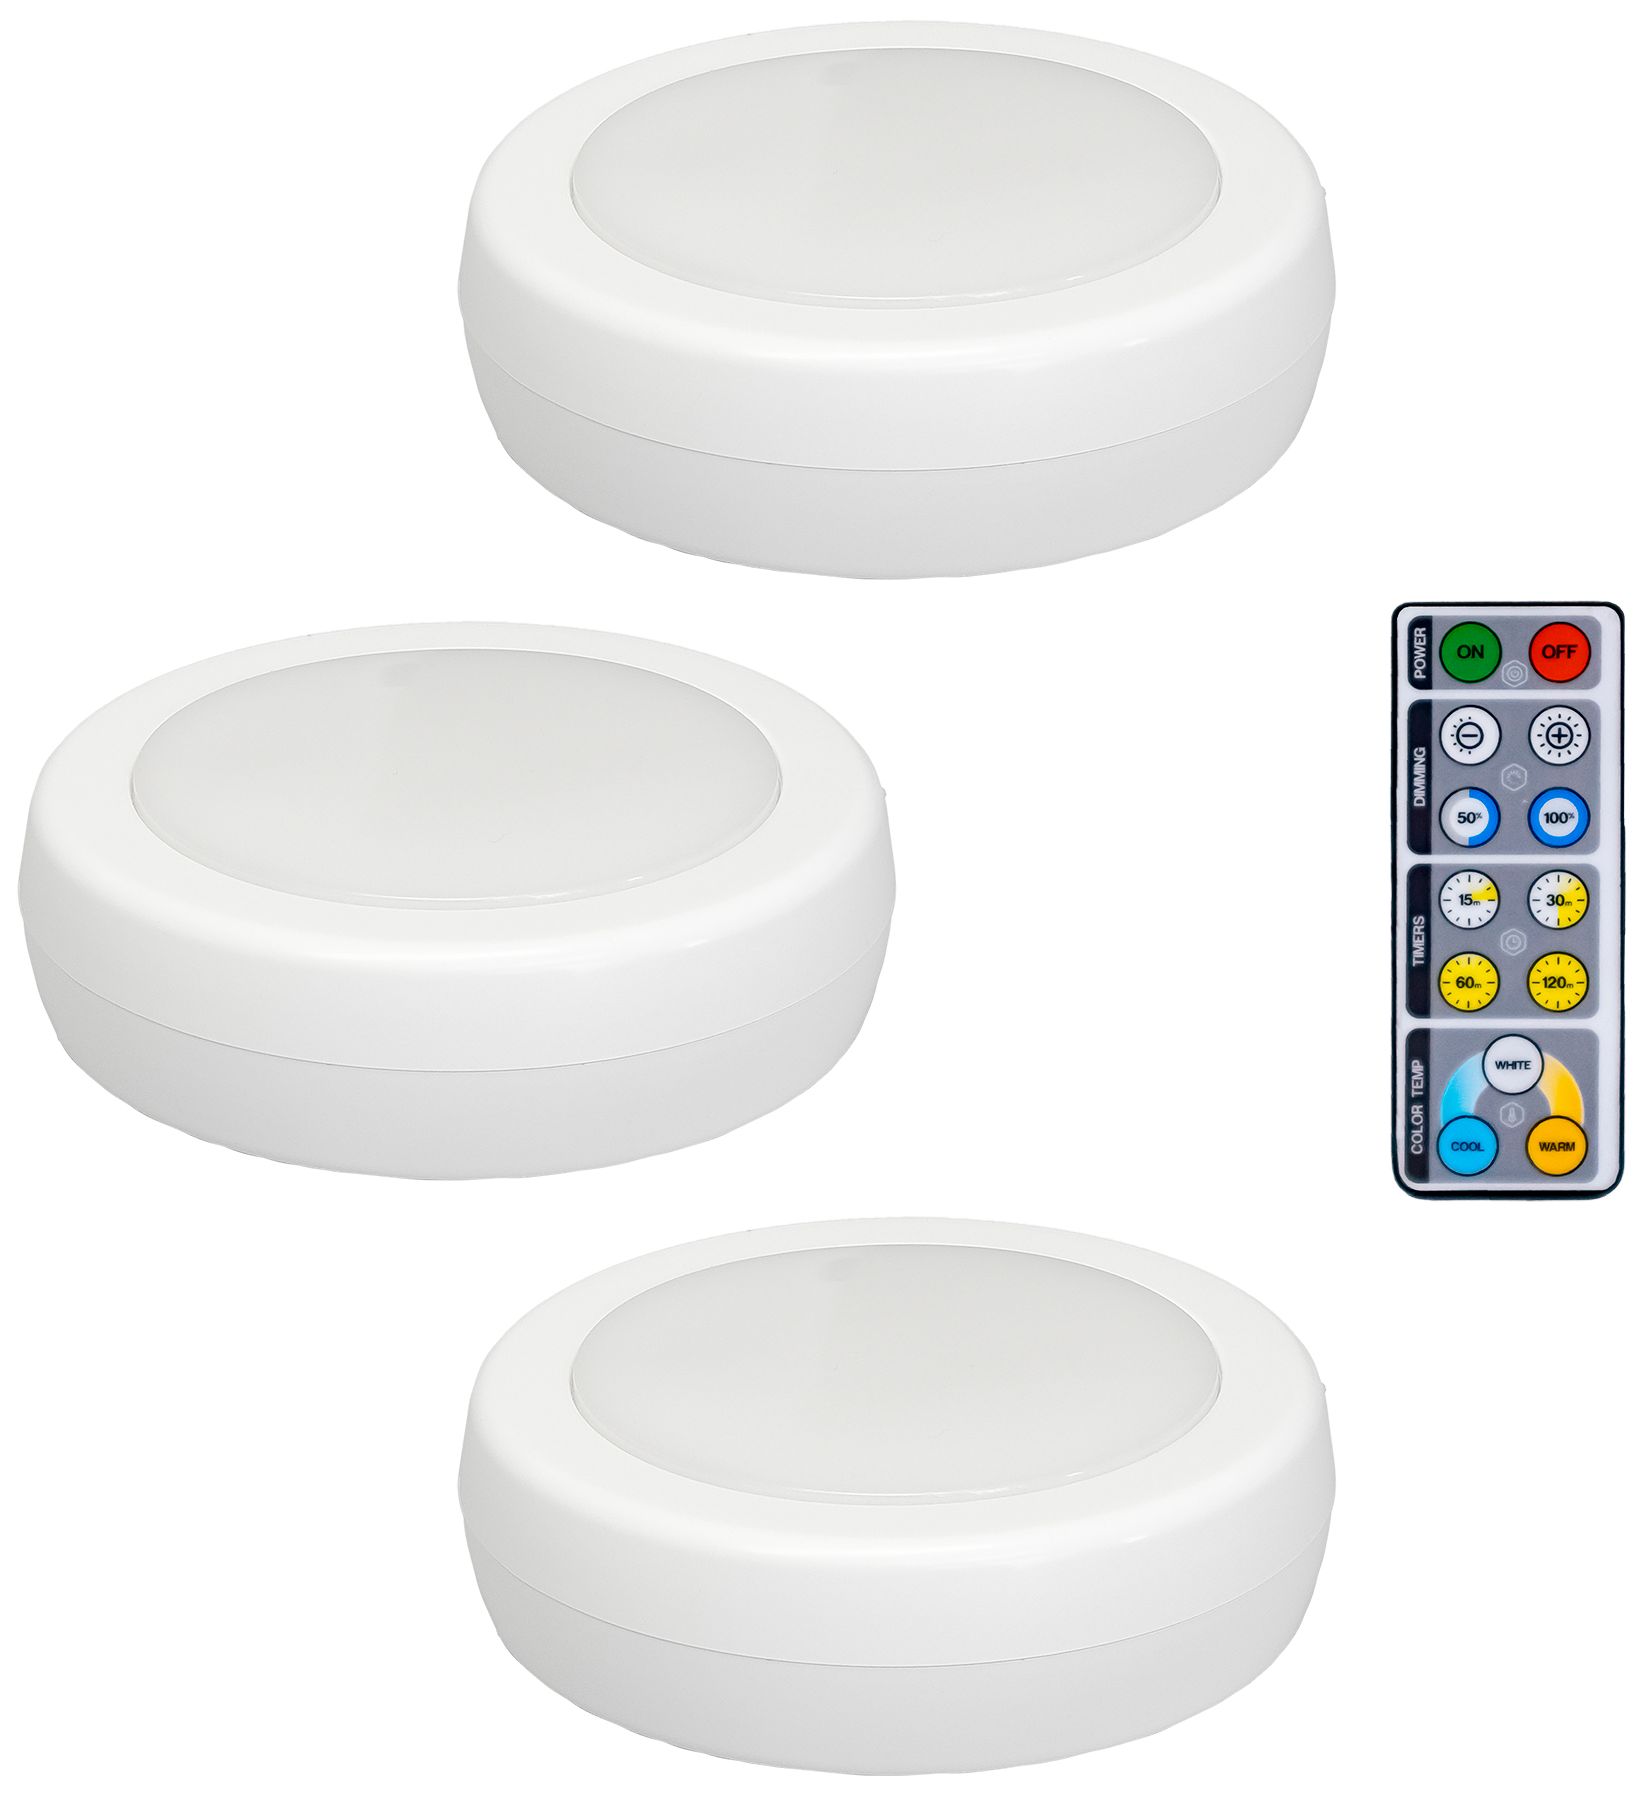 Westek 3 1/4"W White LED Puck Lights Set of 3 with Remote